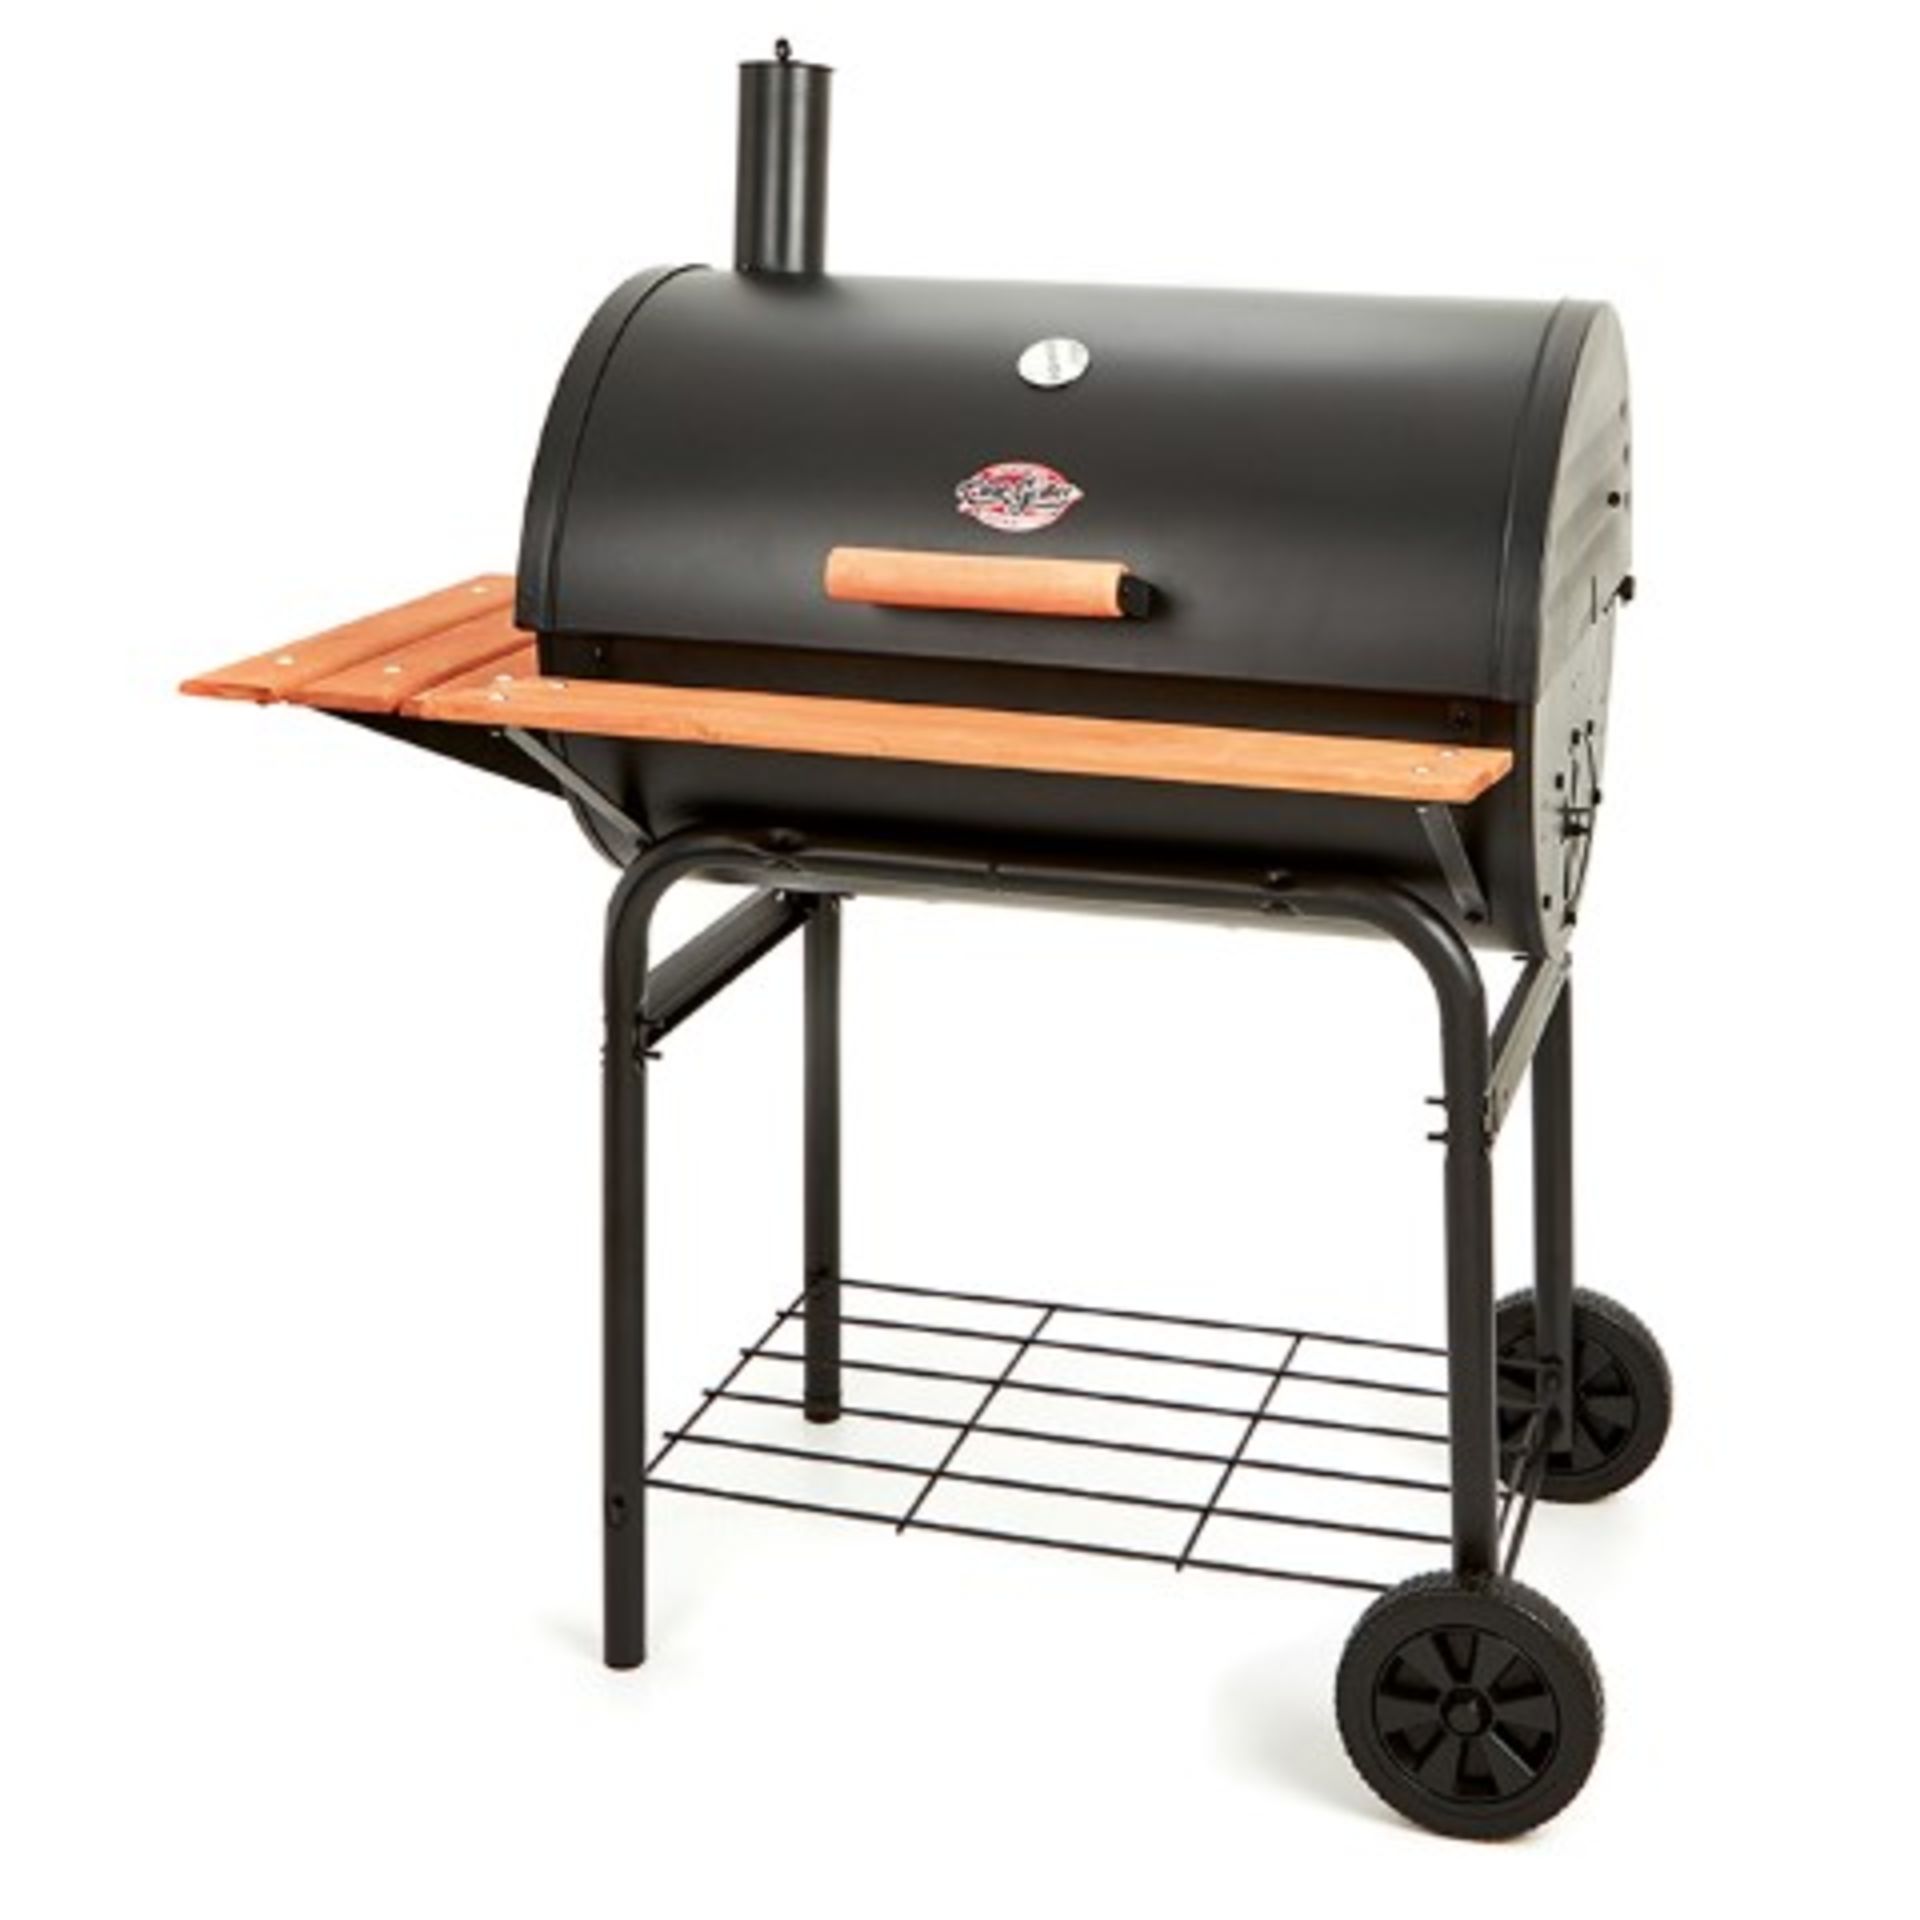 BRAND NEW* CHARCOAL GRILL PRO BLACK PATIO OUTDOOR GARDEN XL COOKING DELUXE AIR NEW CHAR BBQ - Image 3 of 8